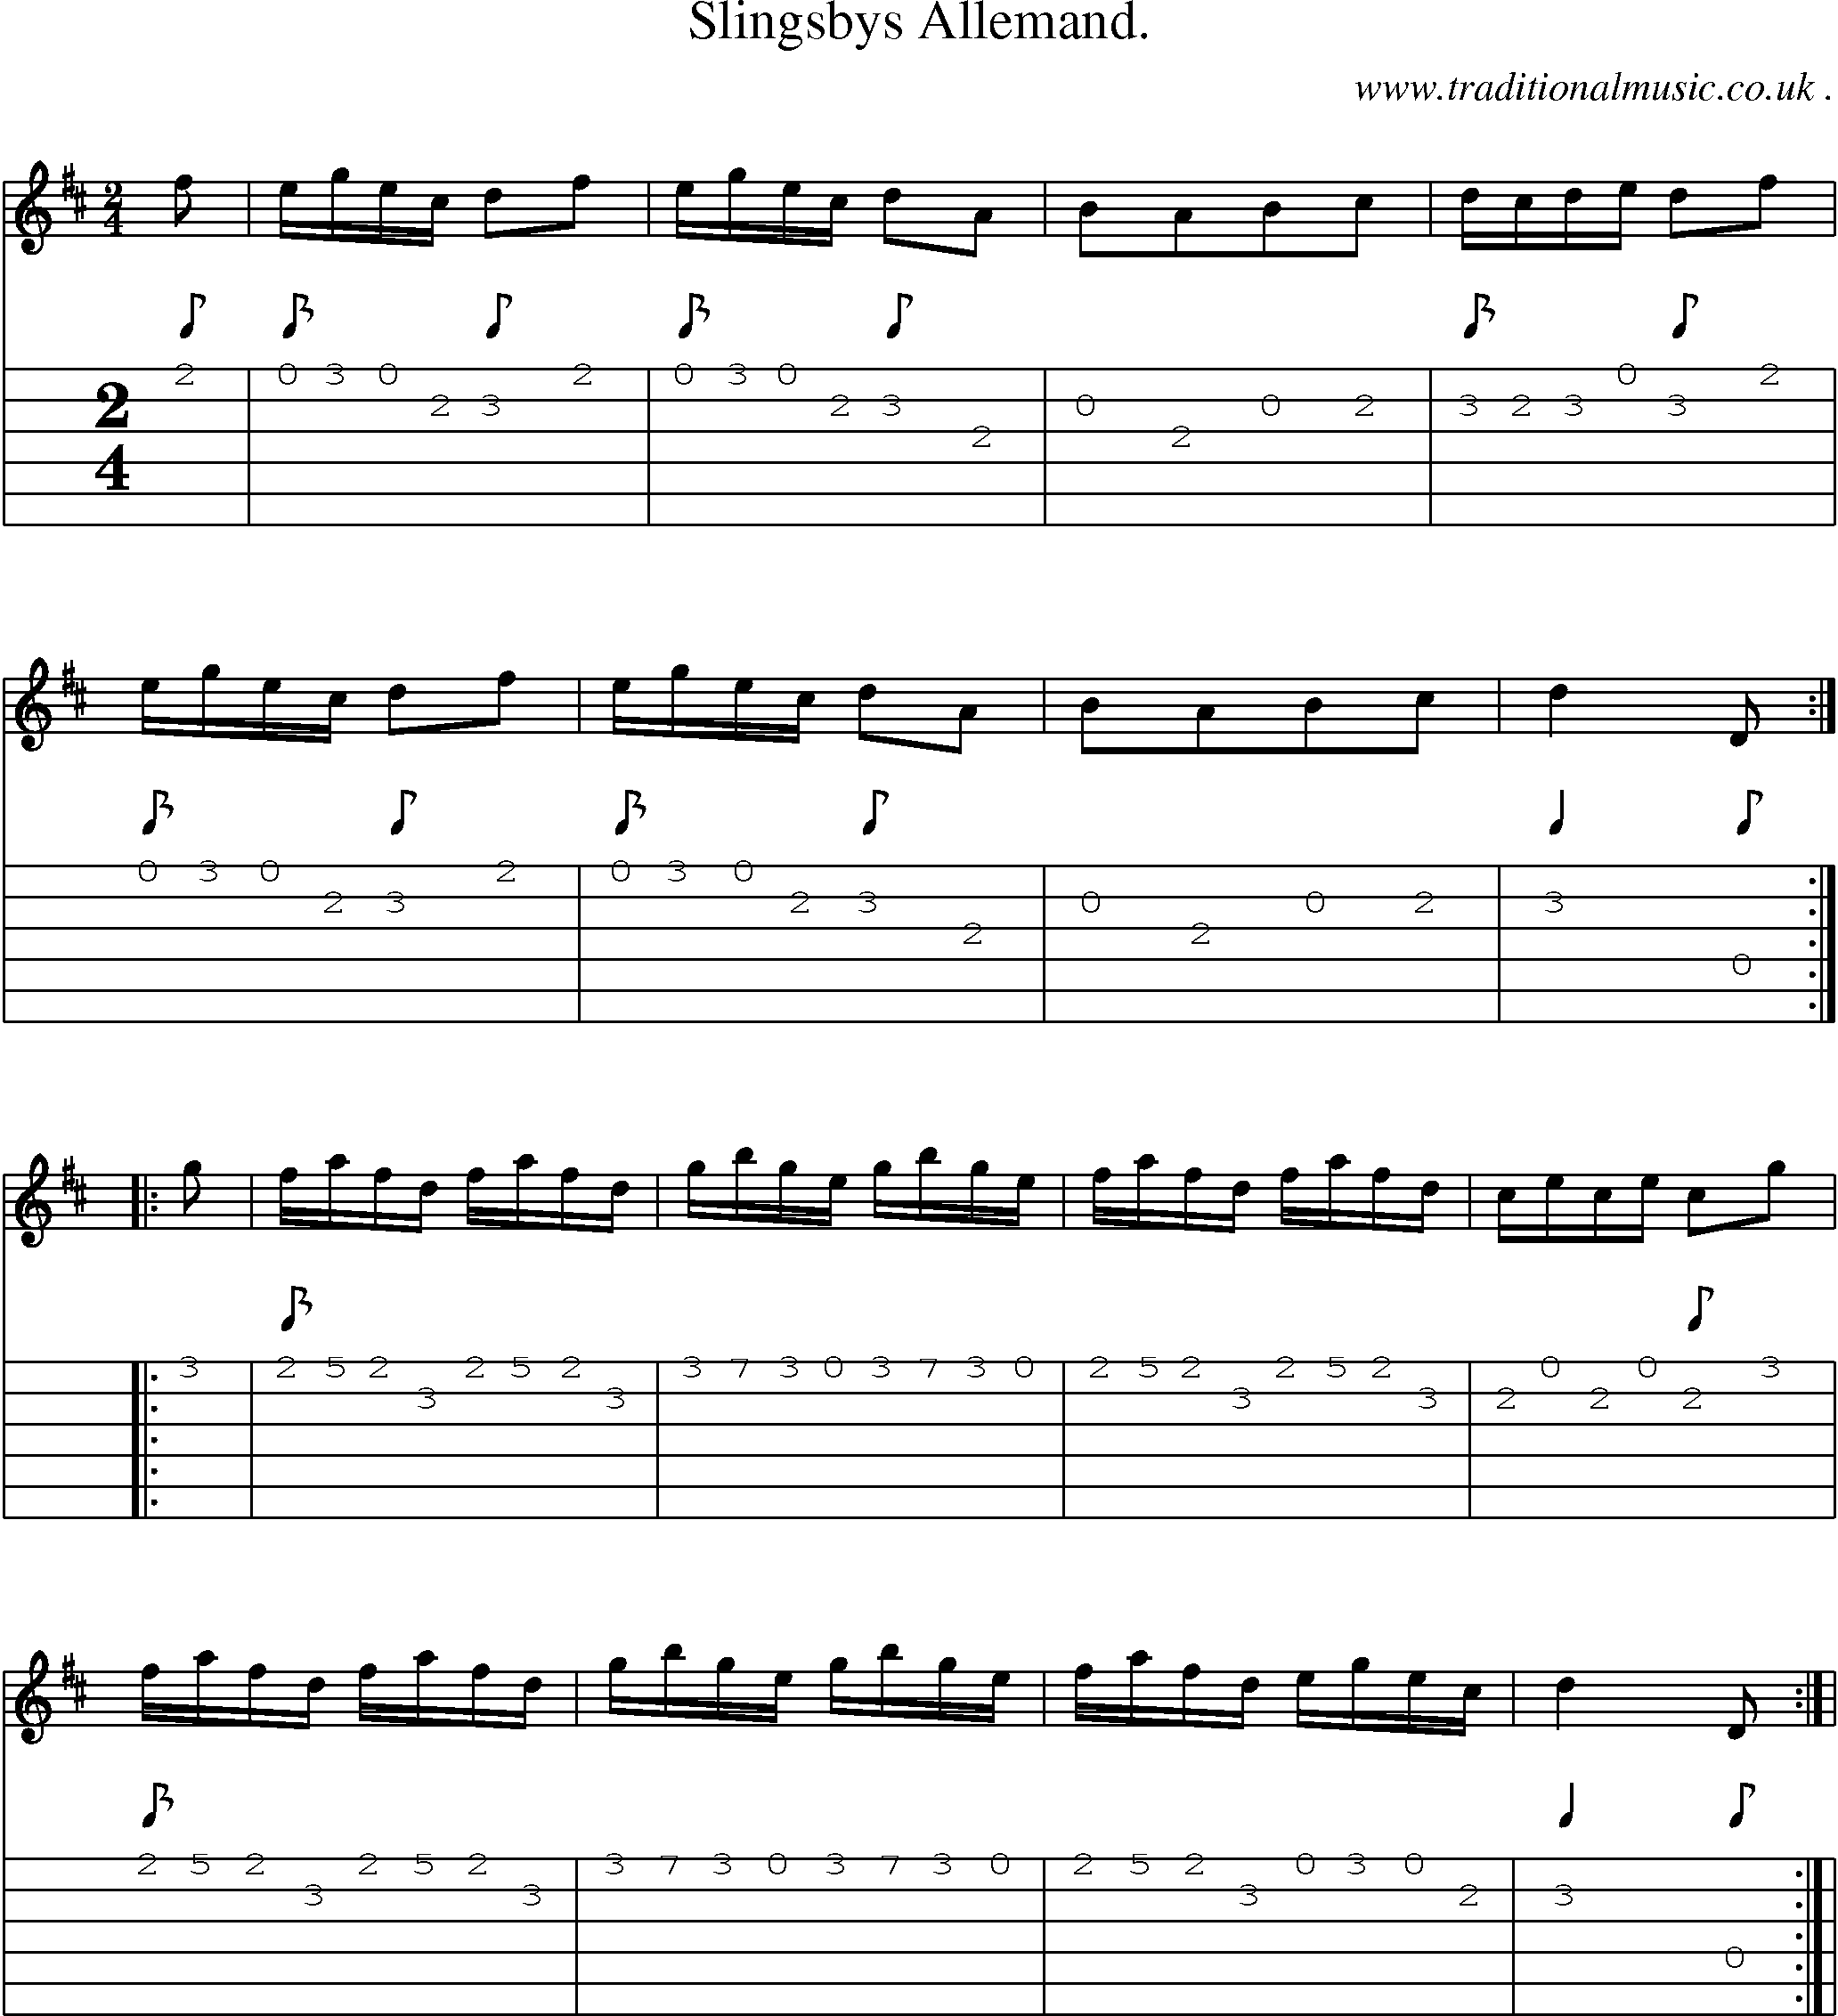 Sheet-Music and Guitar Tabs for Slingsbys Allemand